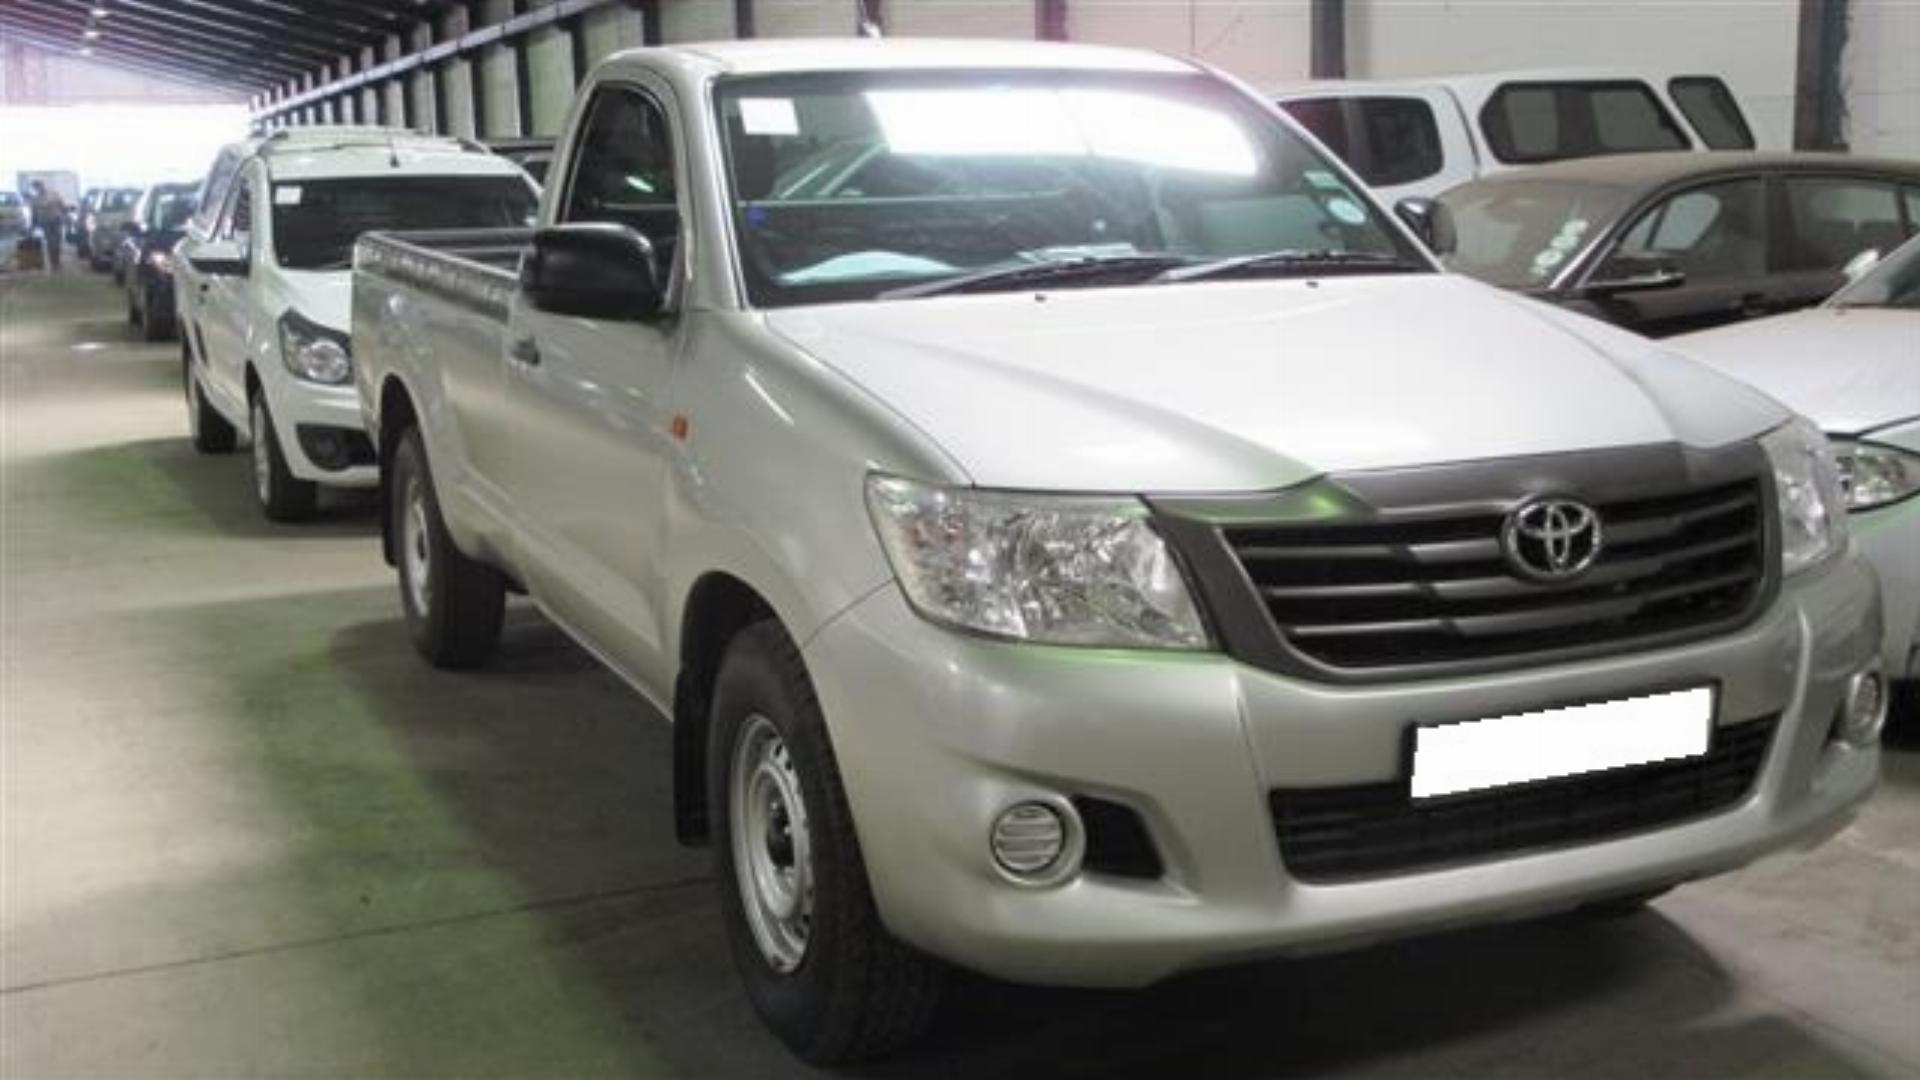 Repossessed Toyota Hilux 2.5 D4D 2013 on auction MC42047